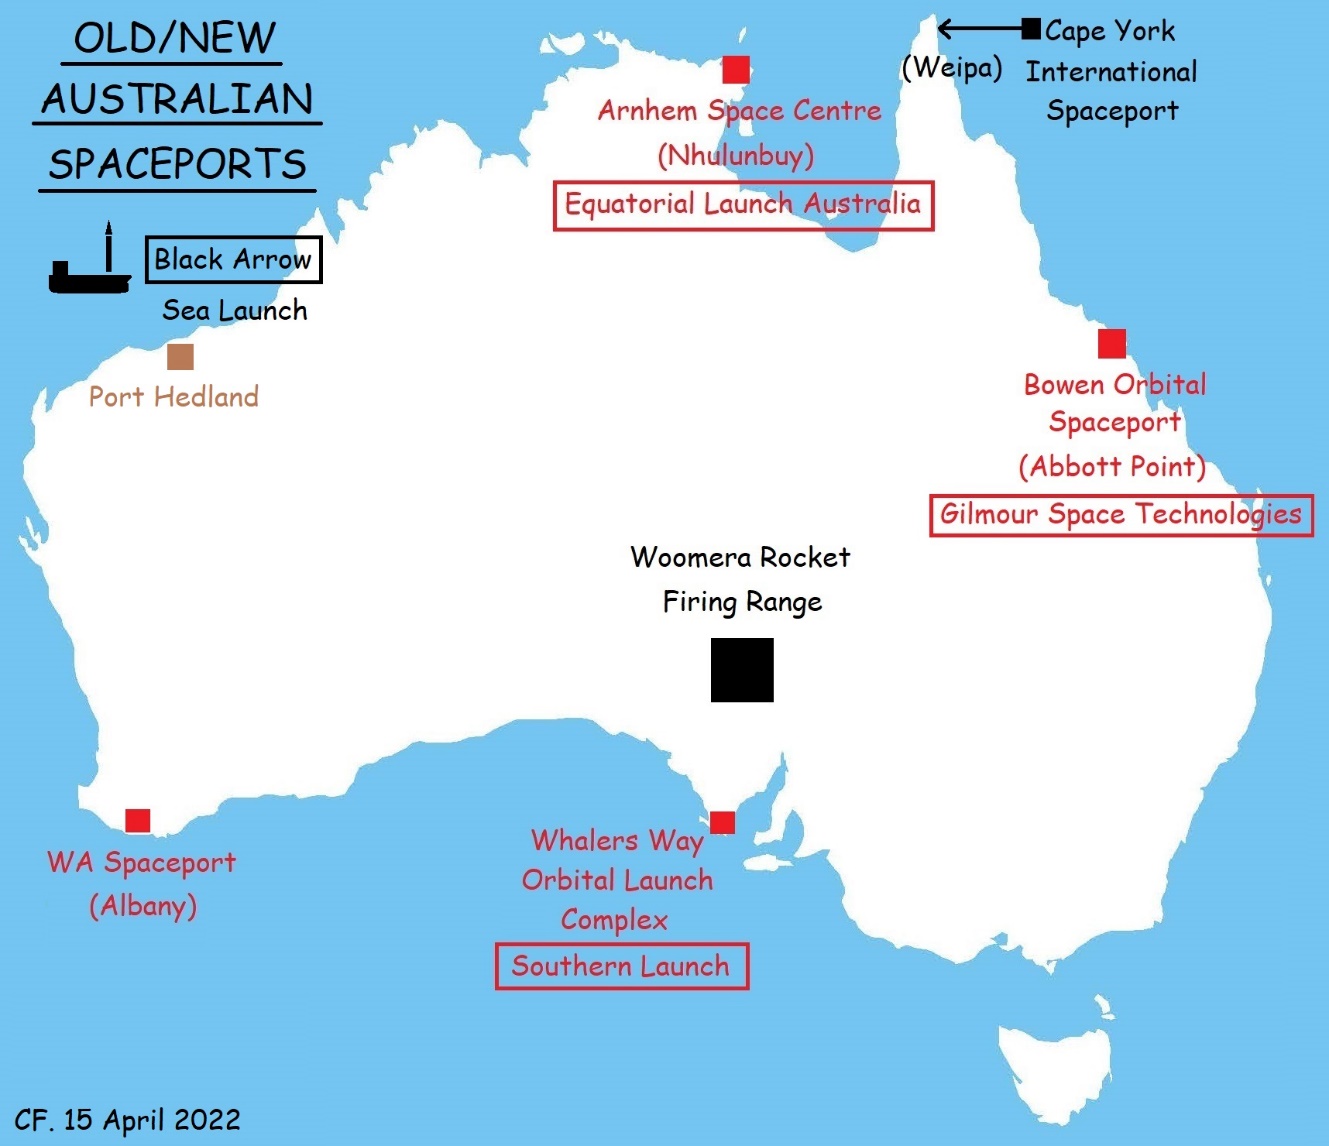 Australia's Old and New Potential Spaceports - SPACE & DEFENSE